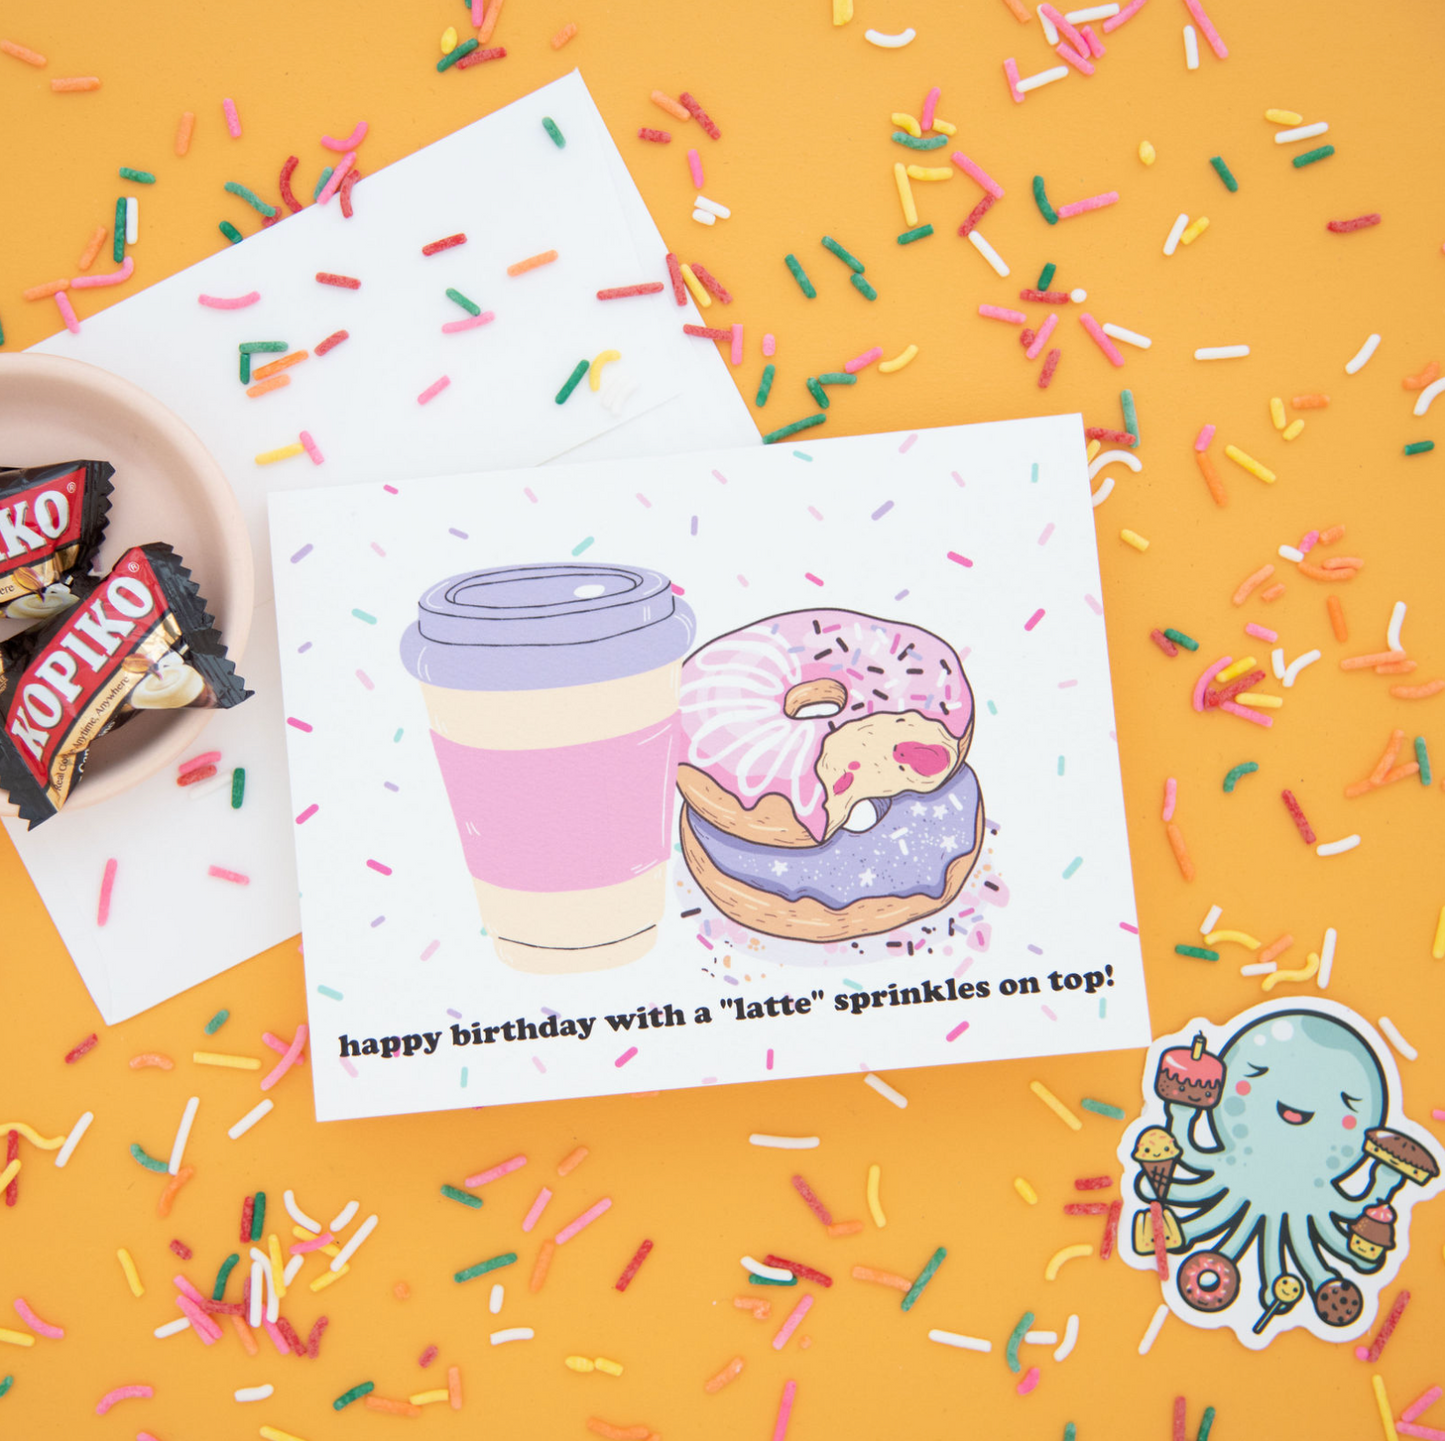 A birthday-themed greeting card with a coffee cup and two donuts stacked and sprinkles on top, surrounded by colorful sprinkles, along with an octopus sticker featuring donuts in the corner. Also included in the image is a pack of Kopiko candy. The image is set against a bright yellow background.